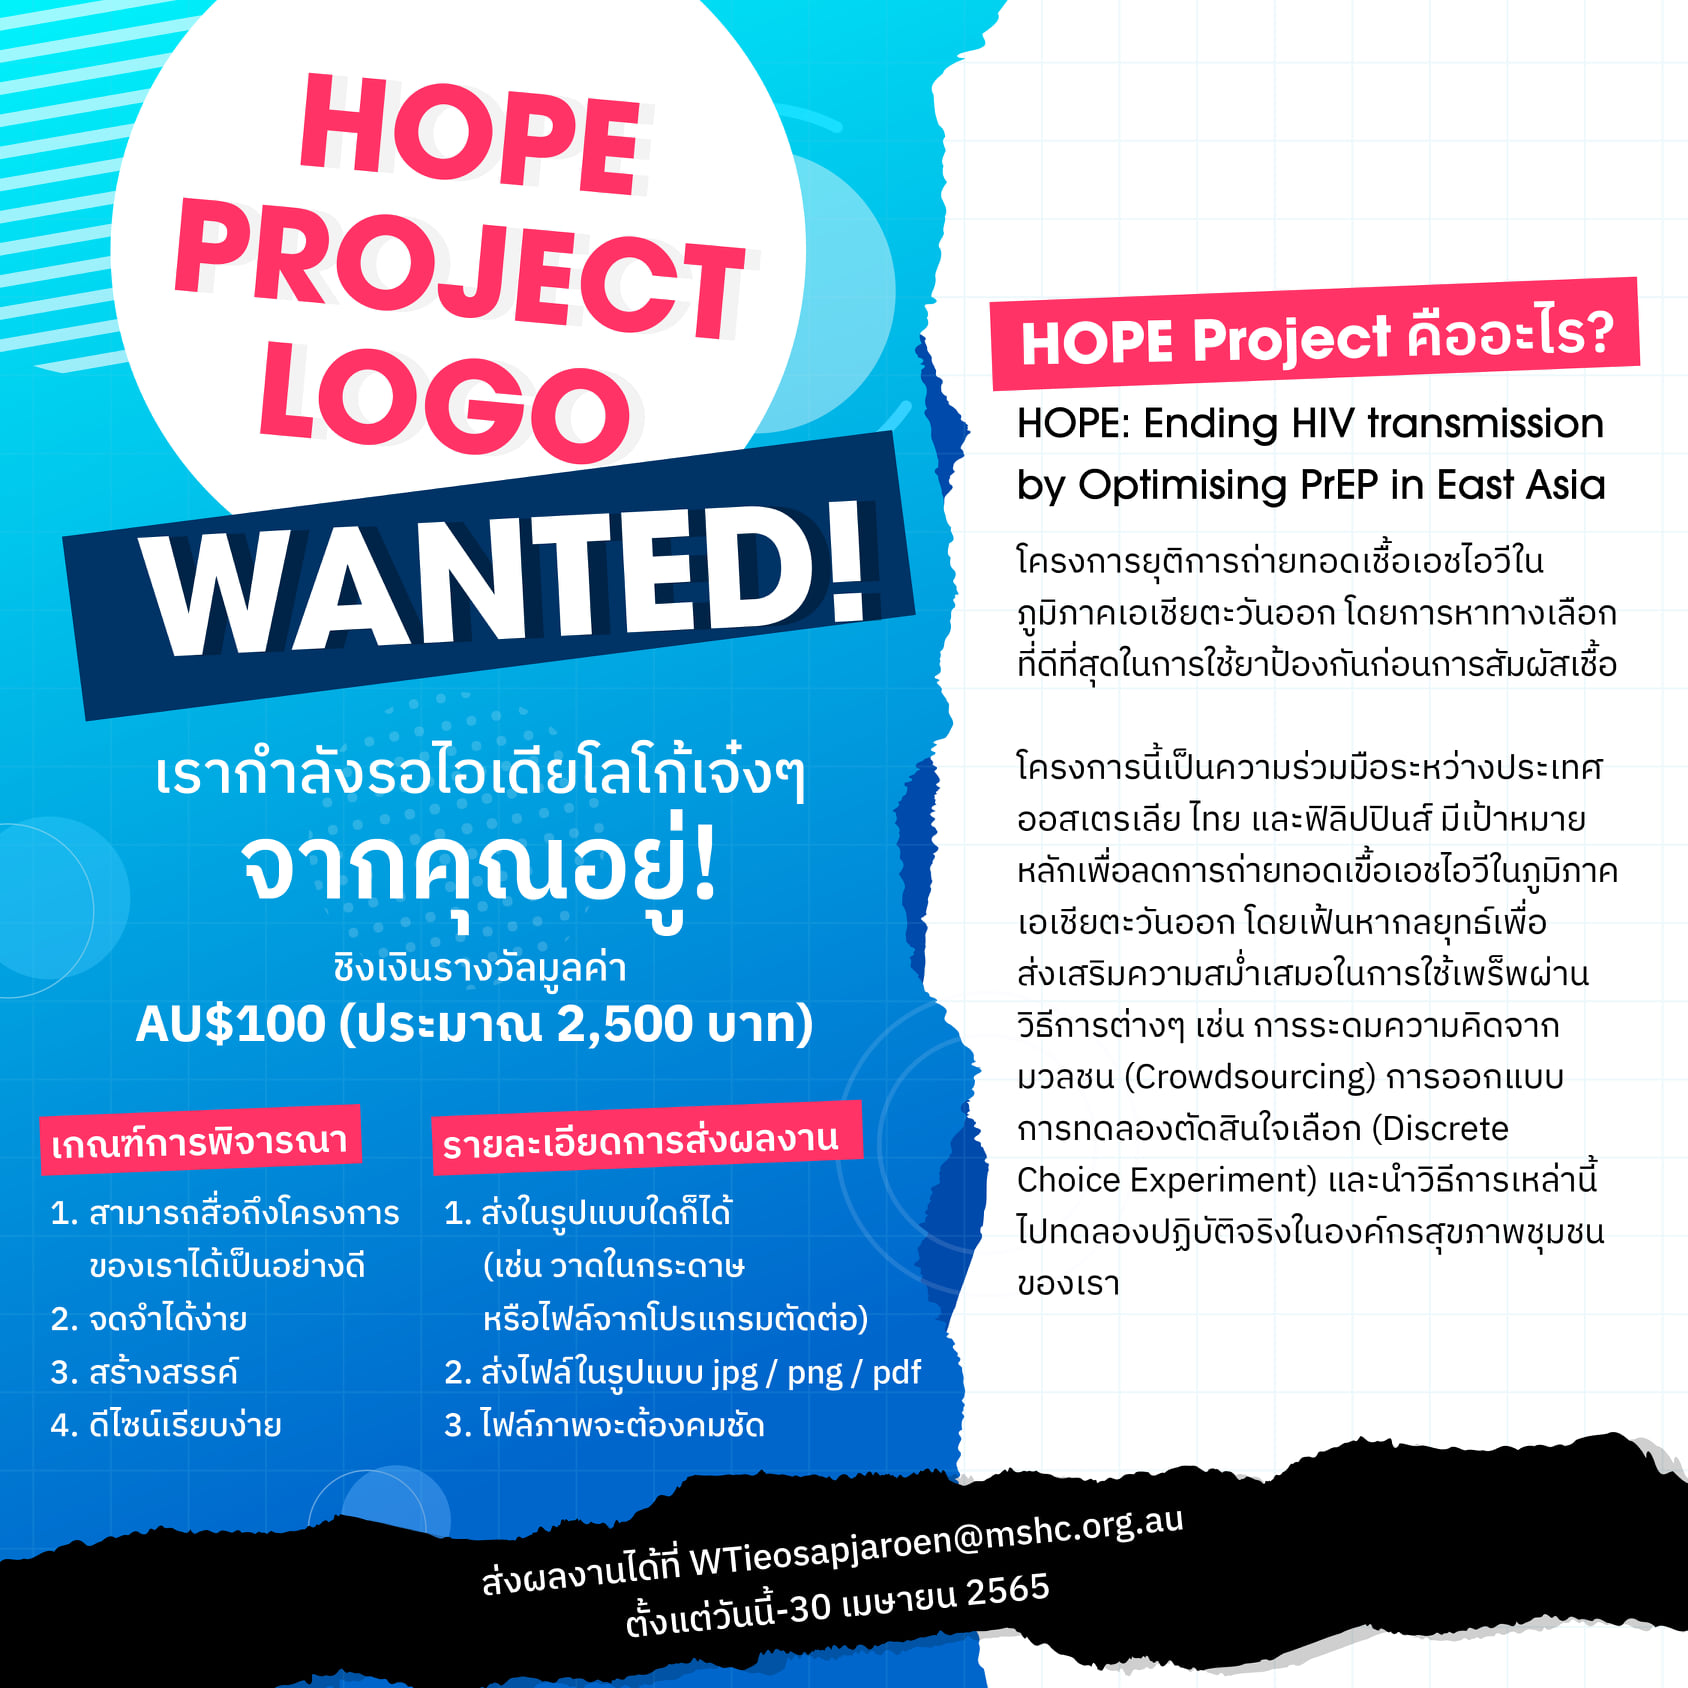 HOPE PROJECT LOGO WANTED